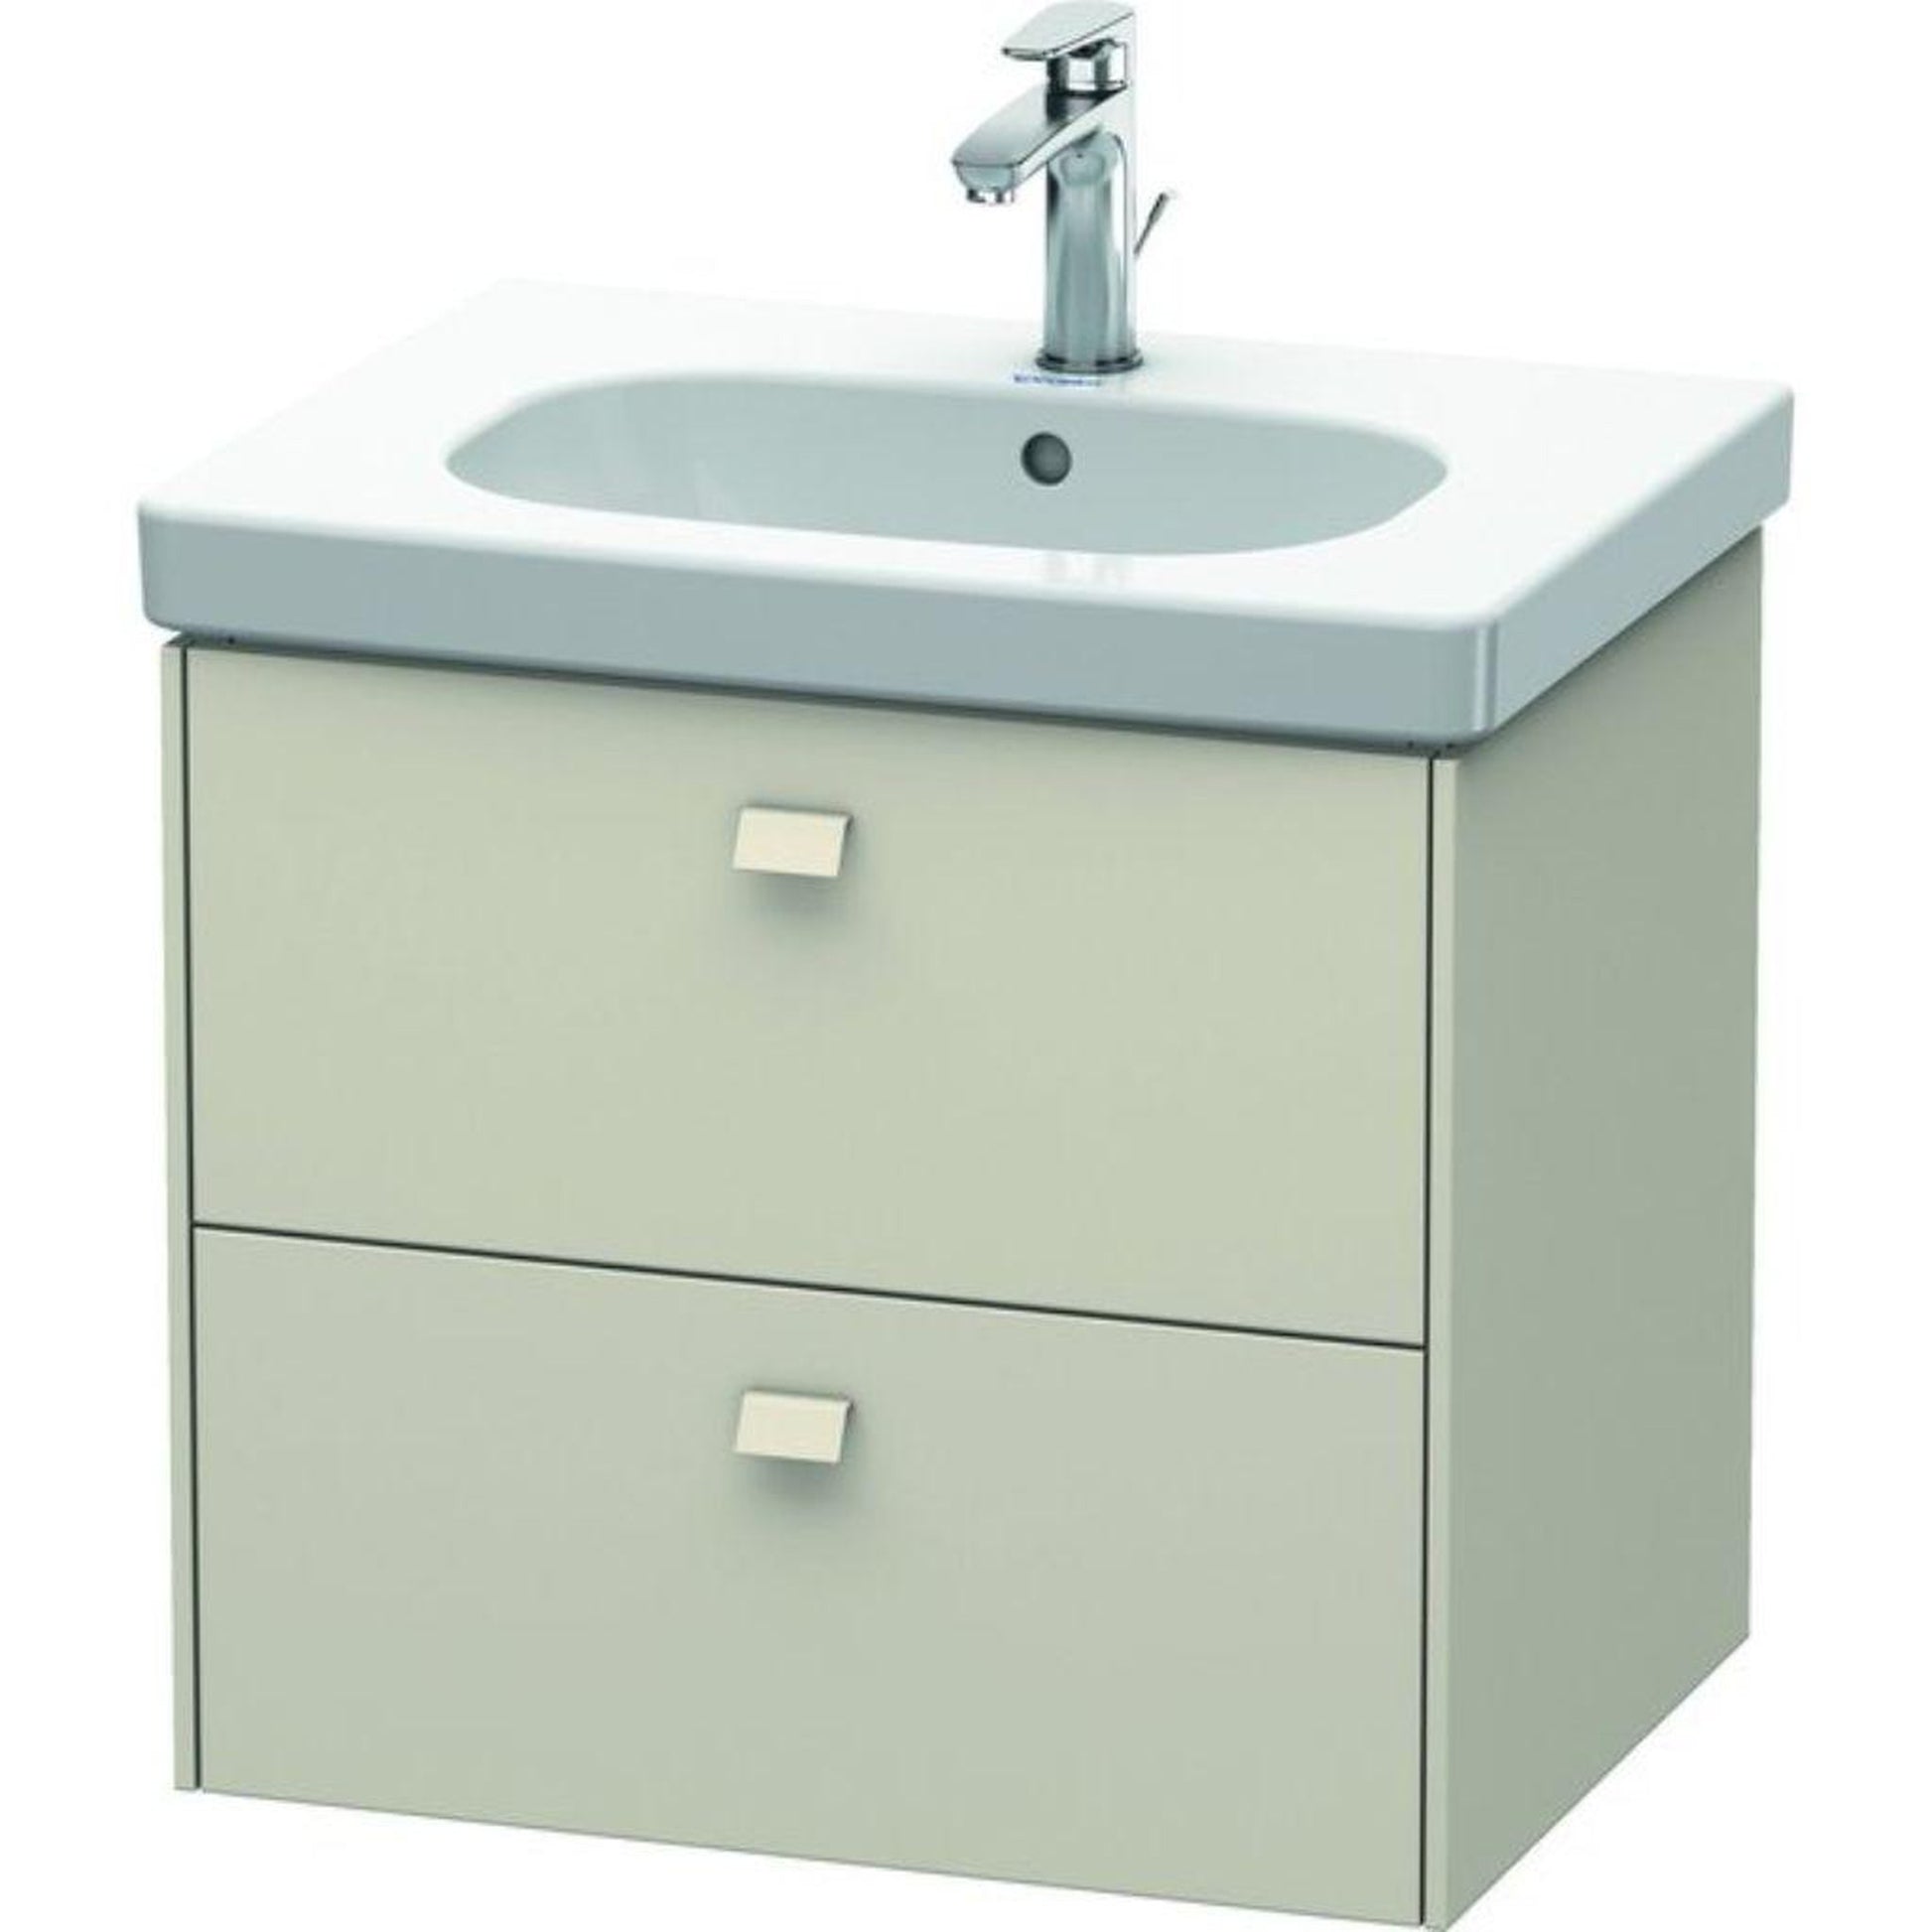 Duravit Brioso BR41450 24" x 22" x 18" Two Drawer Wall-Mount Vanity Unit in Taupe